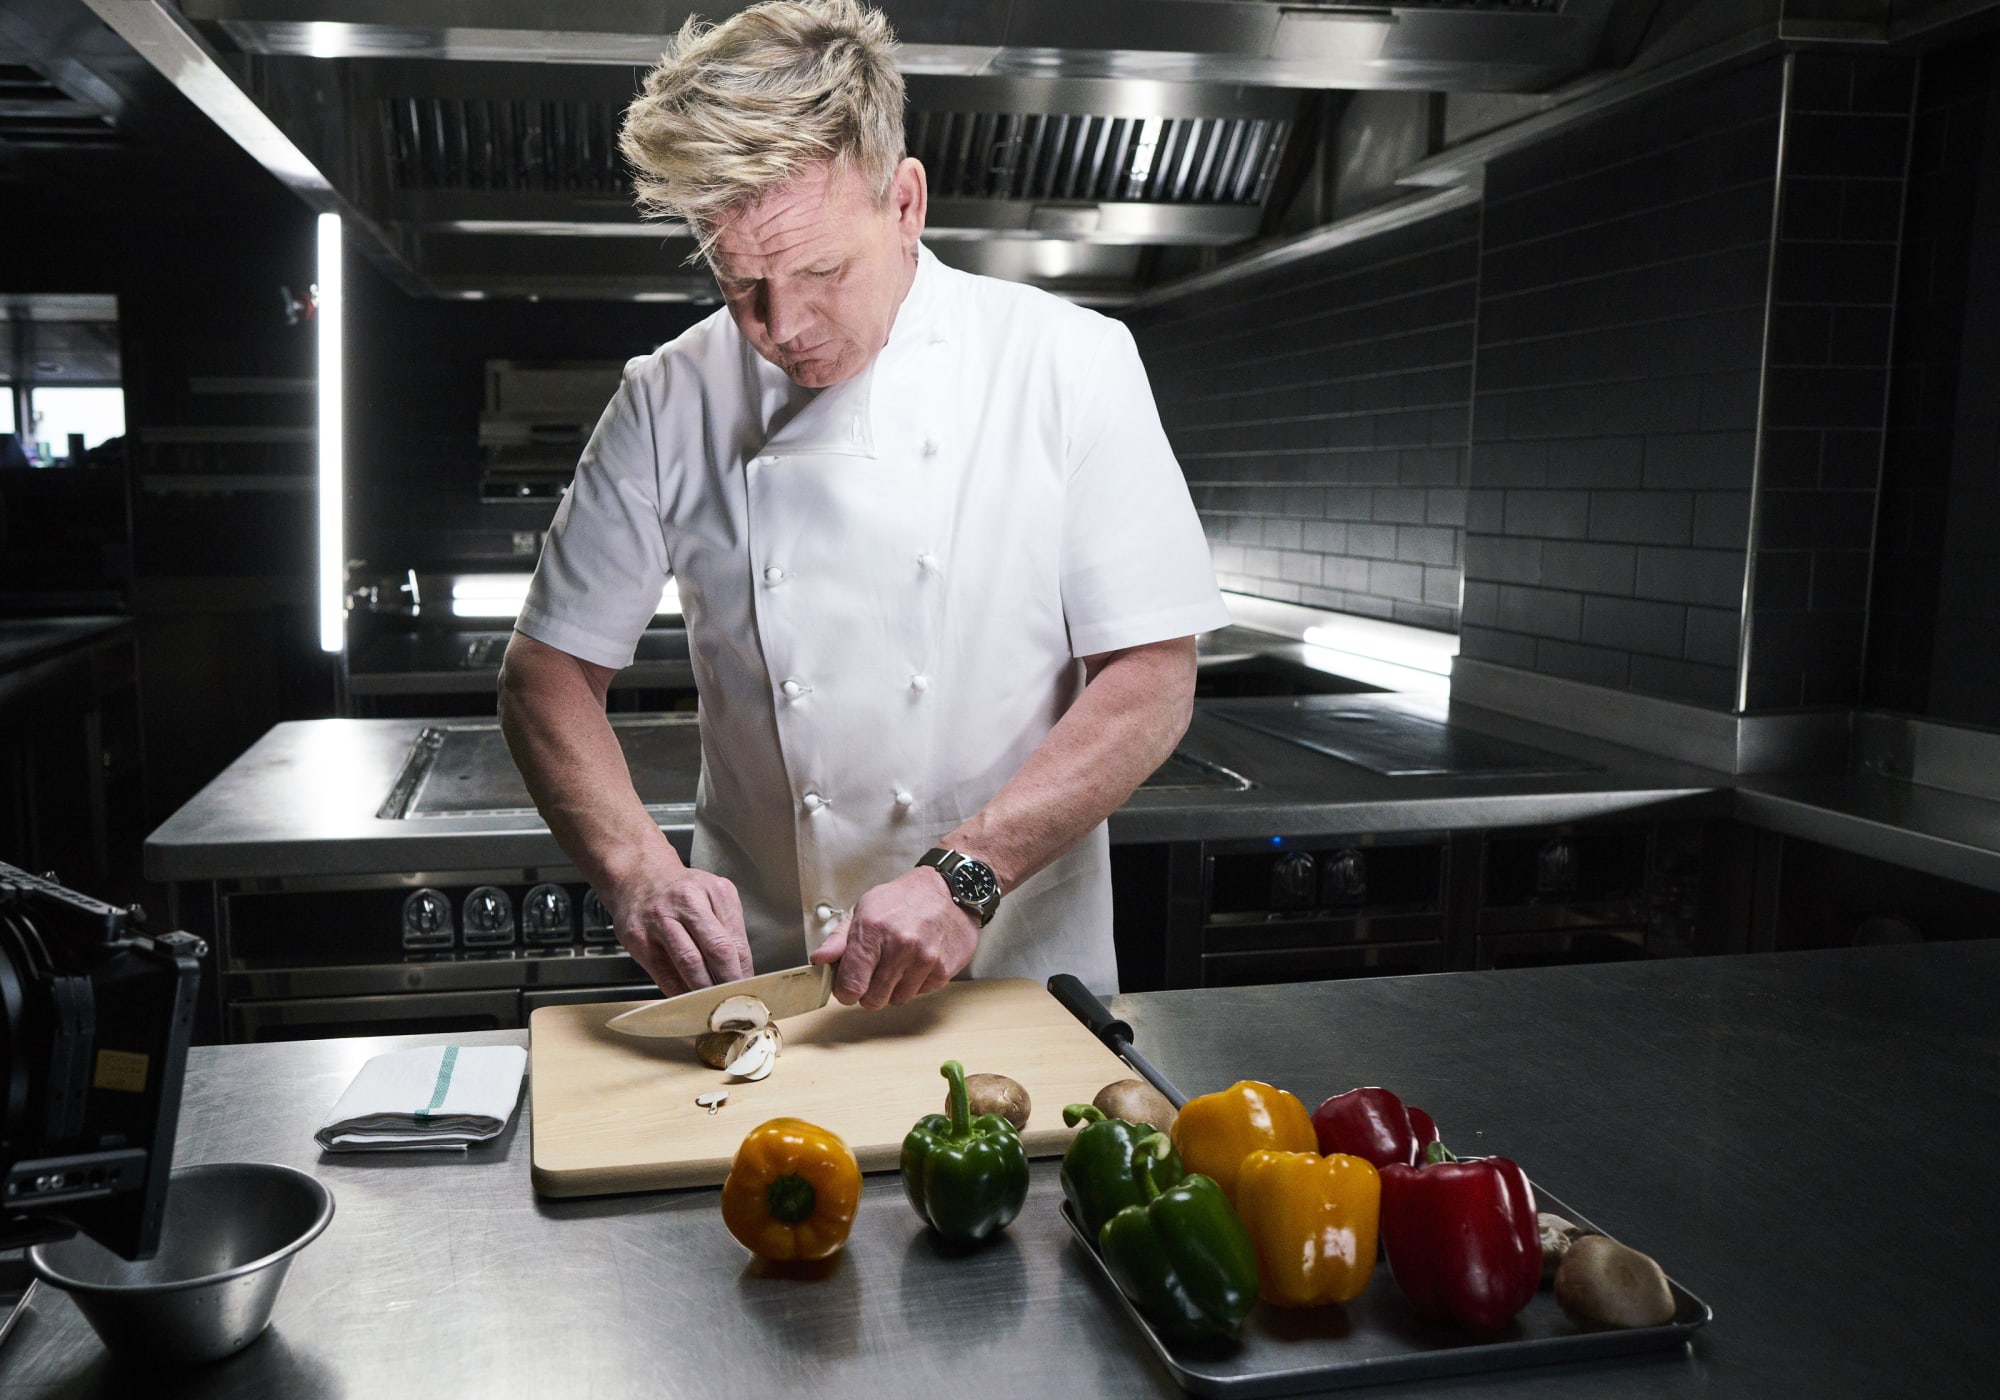 Hell's Kitchen Season 19 has an official premiere date